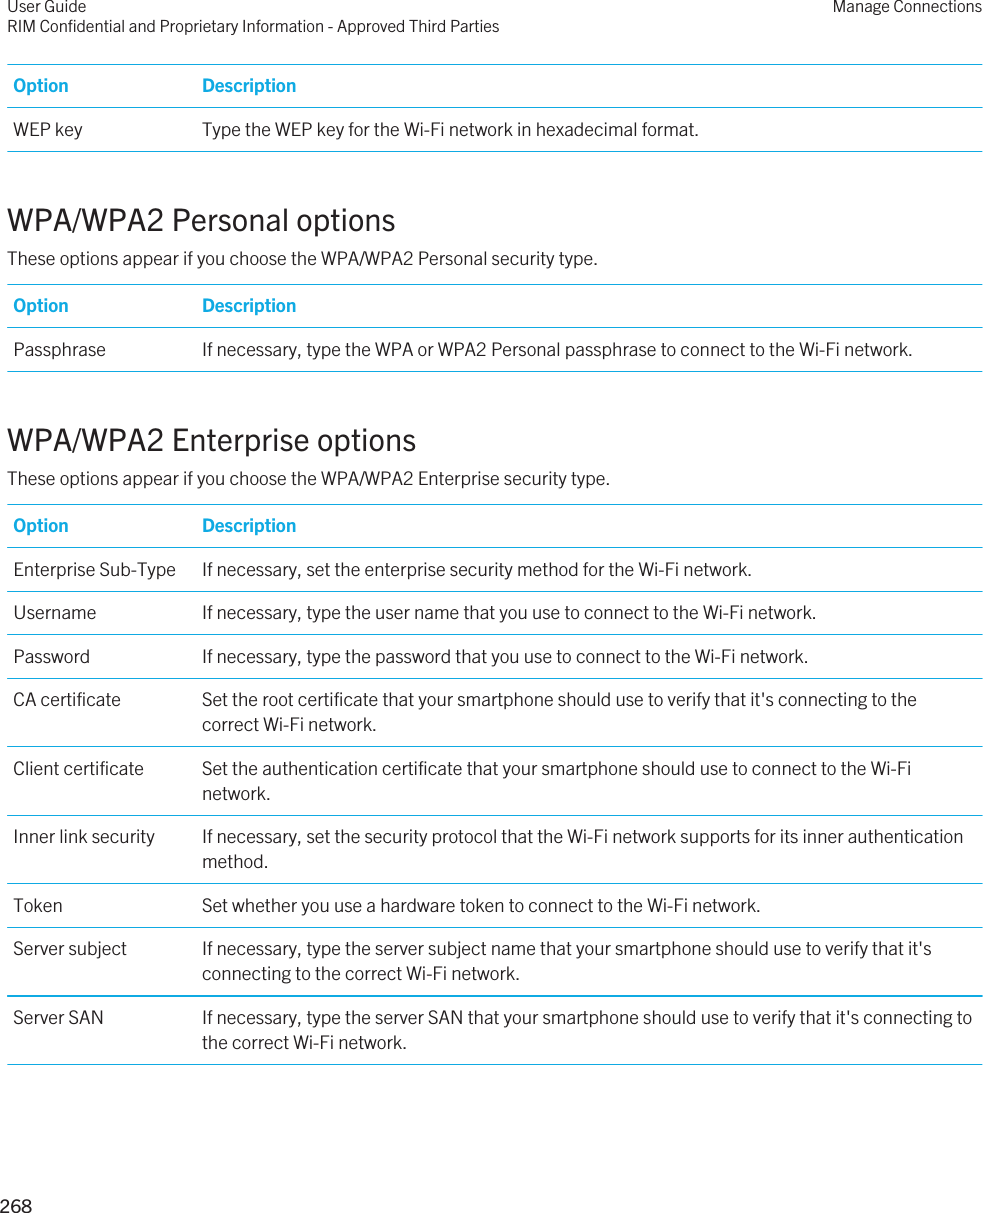 Option DescriptionWEP key Type the WEP key for the Wi-Fi network in hexadecimal format.WPA/WPA2 Personal optionsThese options appear if you choose the WPA/WPA2 Personal security type.Option DescriptionPassphrase If necessary, type the WPA or WPA2 Personal passphrase to connect to the Wi-Fi network.WPA/WPA2 Enterprise optionsThese options appear if you choose the WPA/WPA2 Enterprise security type.Option DescriptionEnterprise Sub-Type If necessary, set the enterprise security method for the Wi-Fi network.Username If necessary, type the user name that you use to connect to the Wi-Fi network.Password If necessary, type the password that you use to connect to the Wi-Fi network.CA certificate Set the root certificate that your smartphone should use to verify that it&apos;s connecting to the correct Wi-Fi network.Client certificate Set the authentication certificate that your smartphone should use to connect to the Wi-Fi network.Inner link security If necessary, set the security protocol that the Wi-Fi network supports for its inner authentication method.Token Set whether you use a hardware token to connect to the Wi-Fi network.Server subject If necessary, type the server subject name that your smartphone should use to verify that it&apos;s connecting to the correct Wi-Fi network.Server SAN If necessary, type the server SAN that your smartphone should use to verify that it&apos;s connecting to the correct Wi-Fi network.User GuideRIM Confidential and Proprietary Information - Approved Third PartiesManage Connections268 